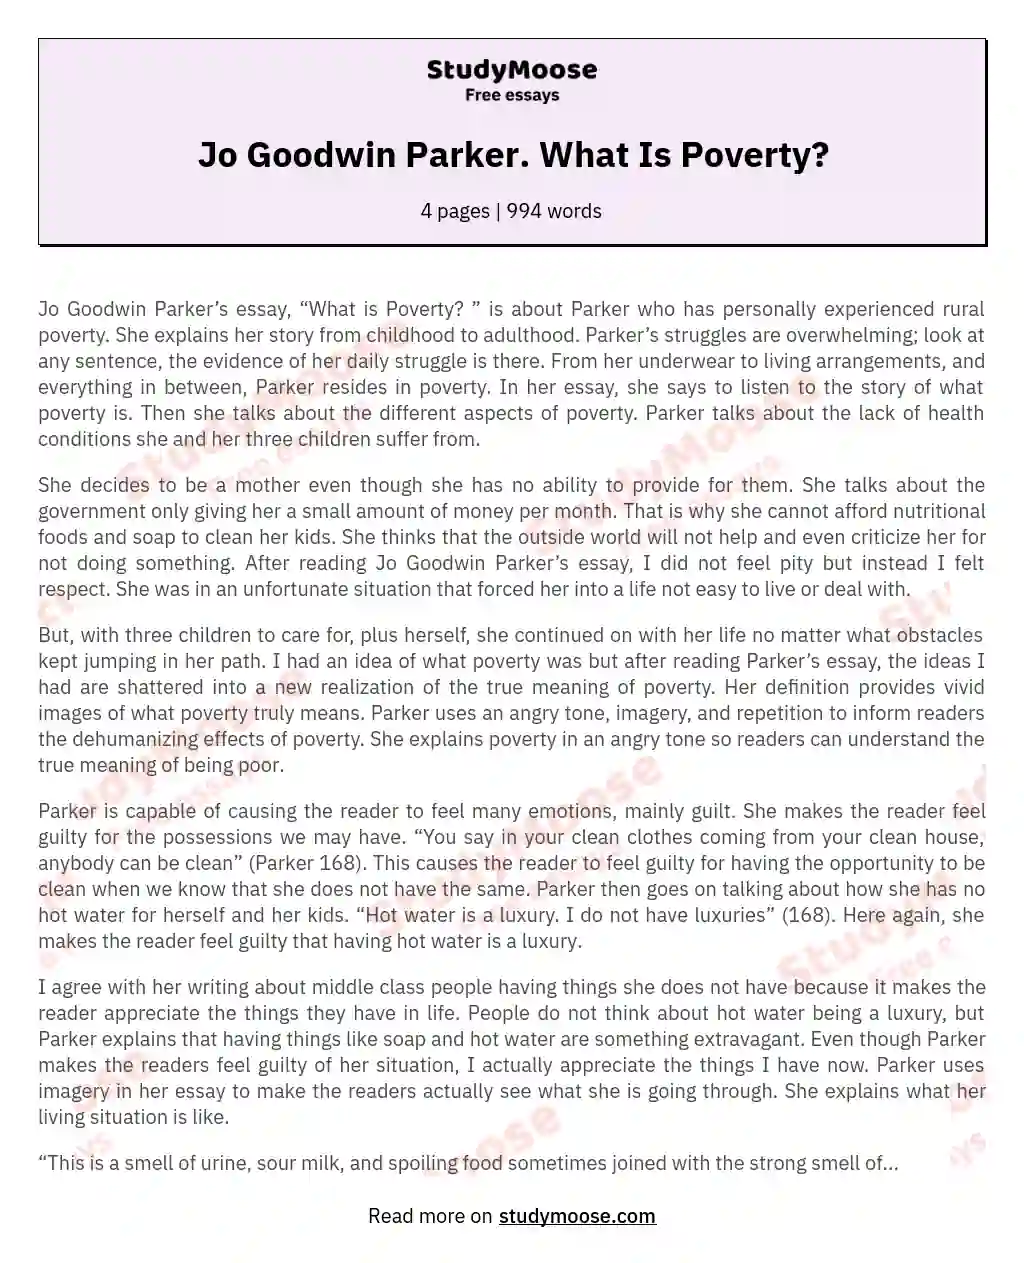 Jo Goodwin Parker. What Is Poverty? essay